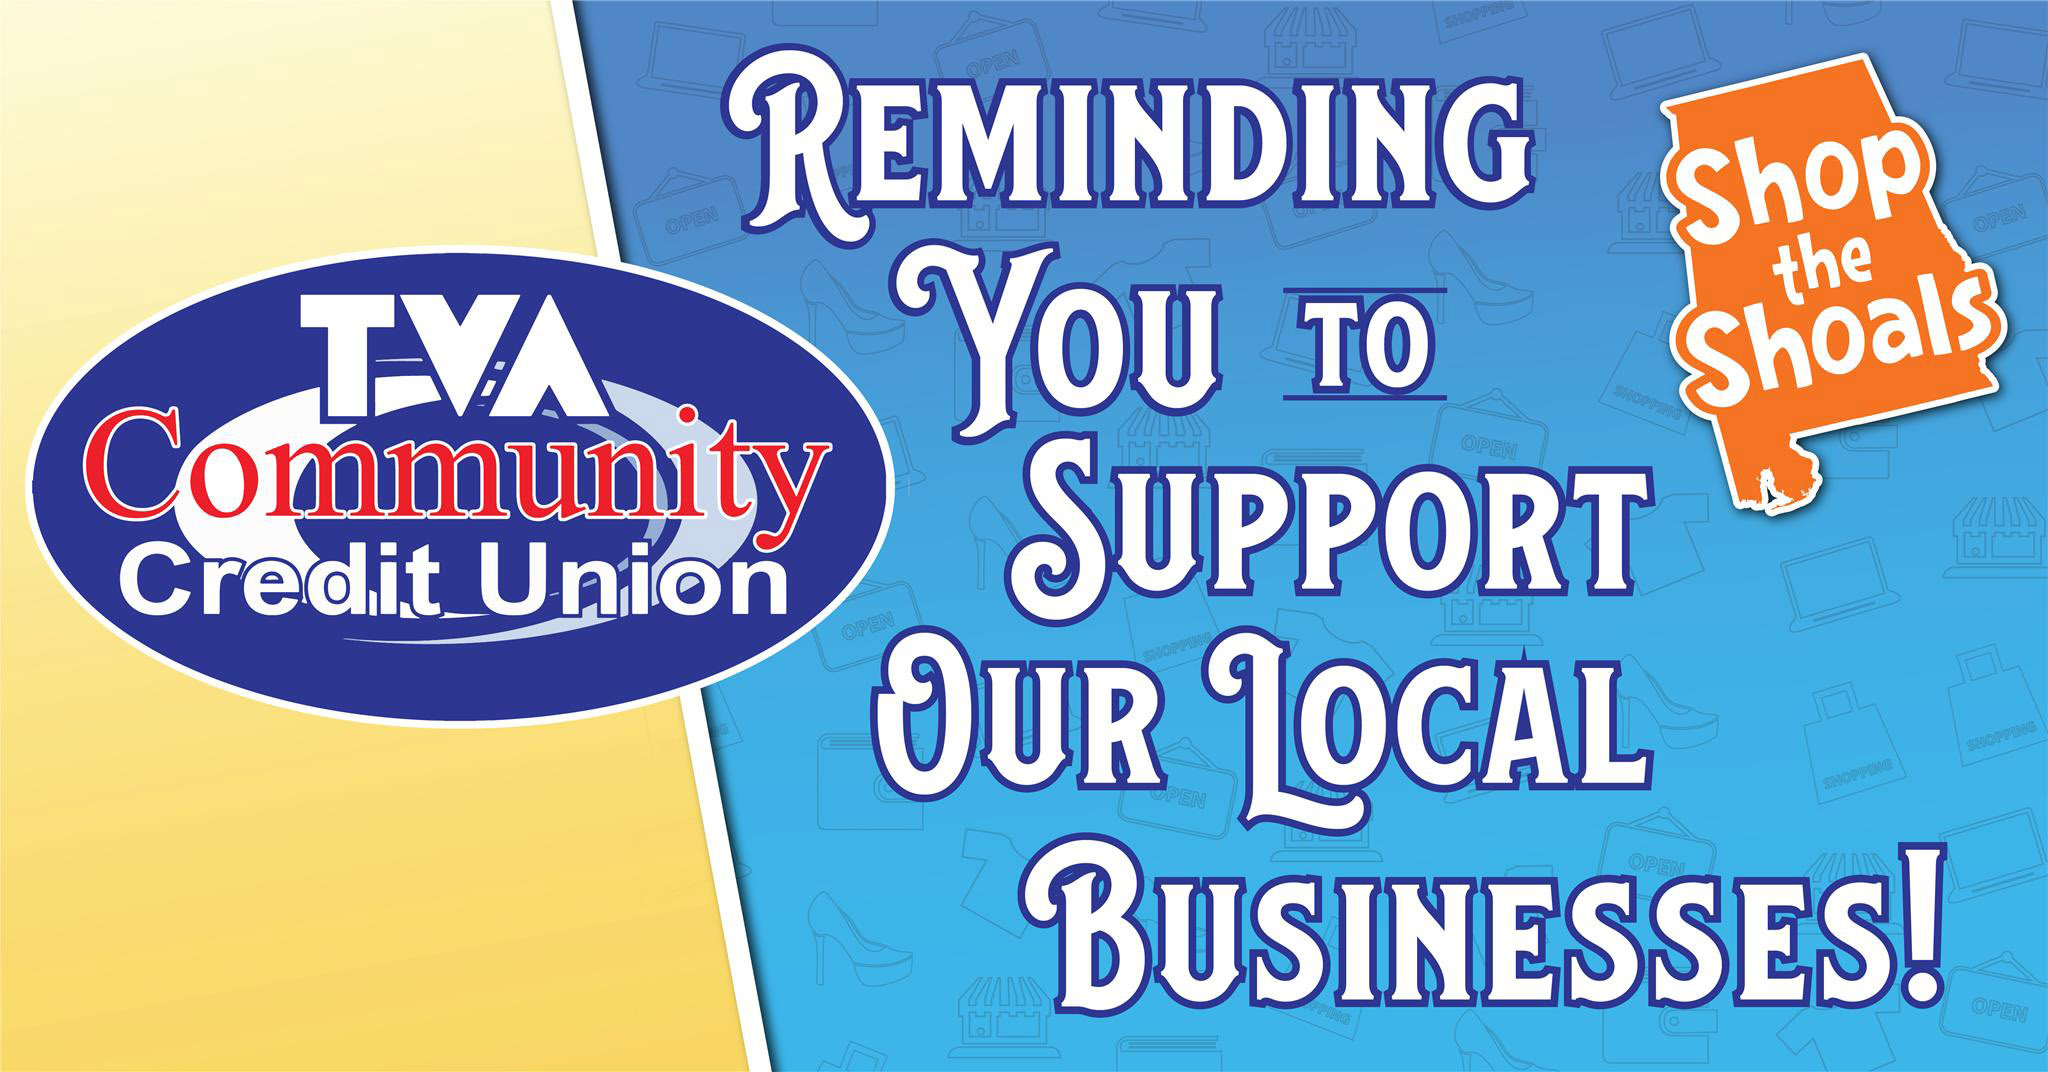 TVA Community Credit Union reminding you to support our local businesses!